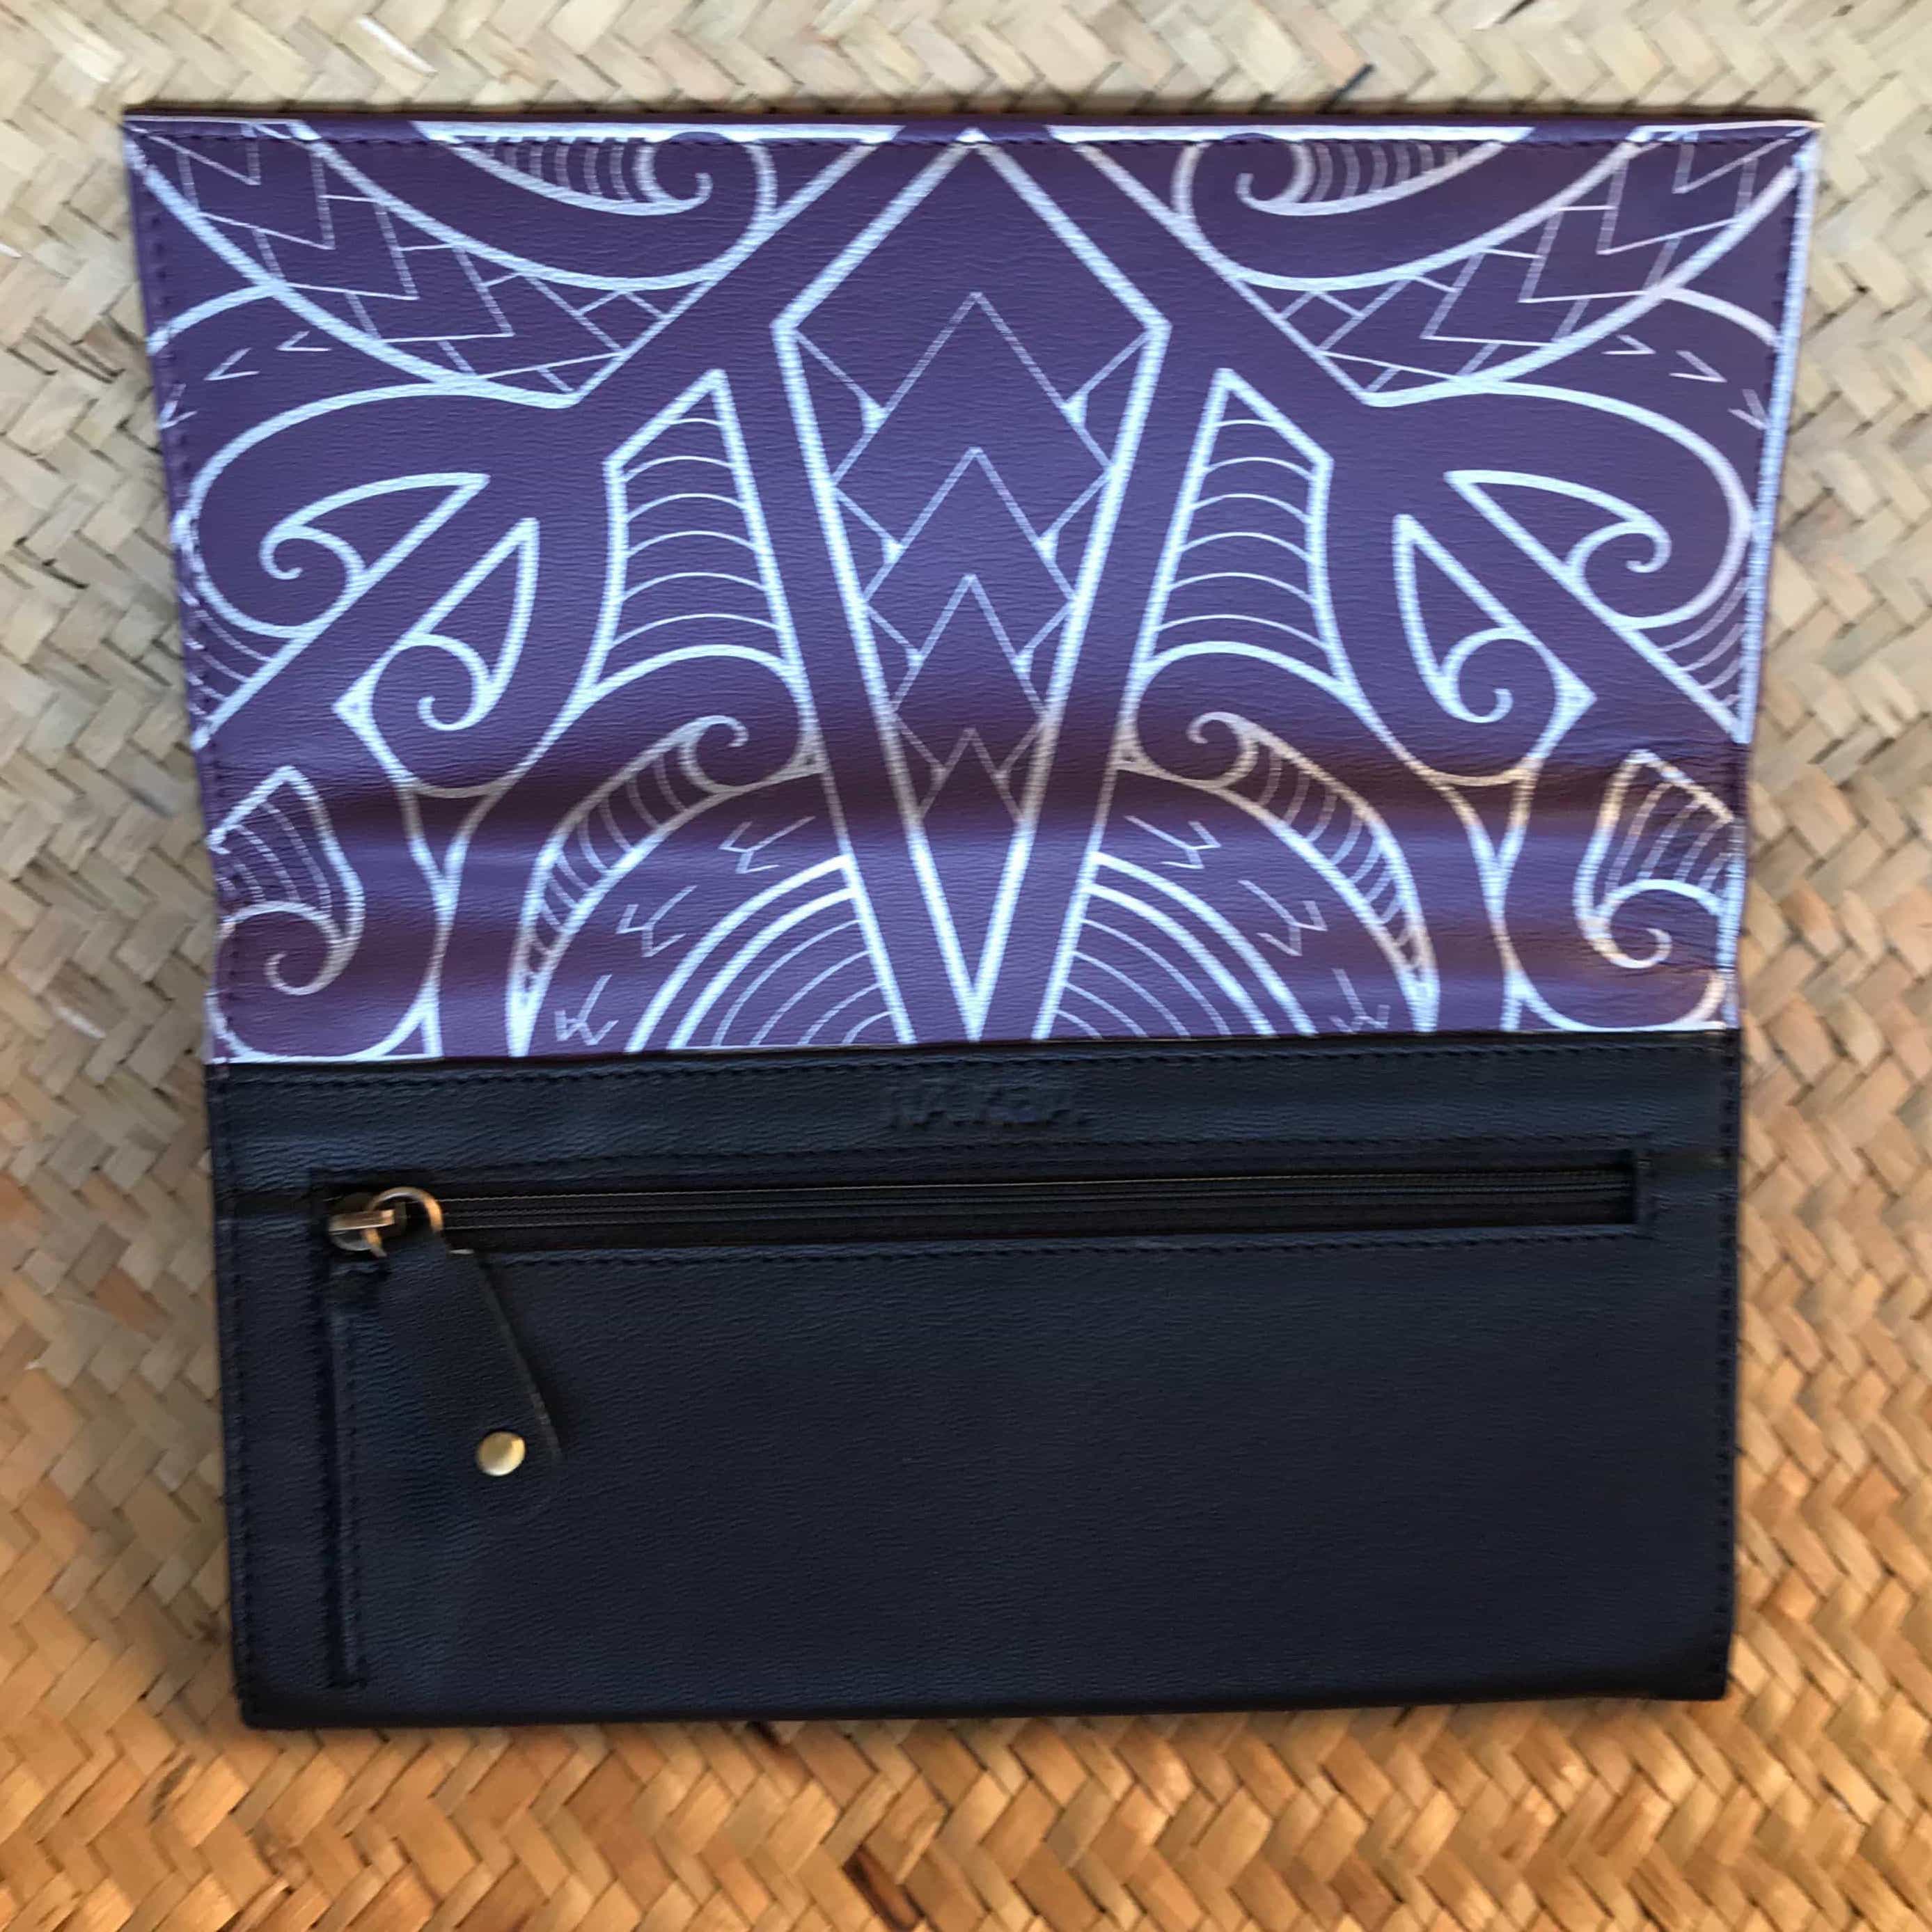 Open front view of a purple leather clutch wallet